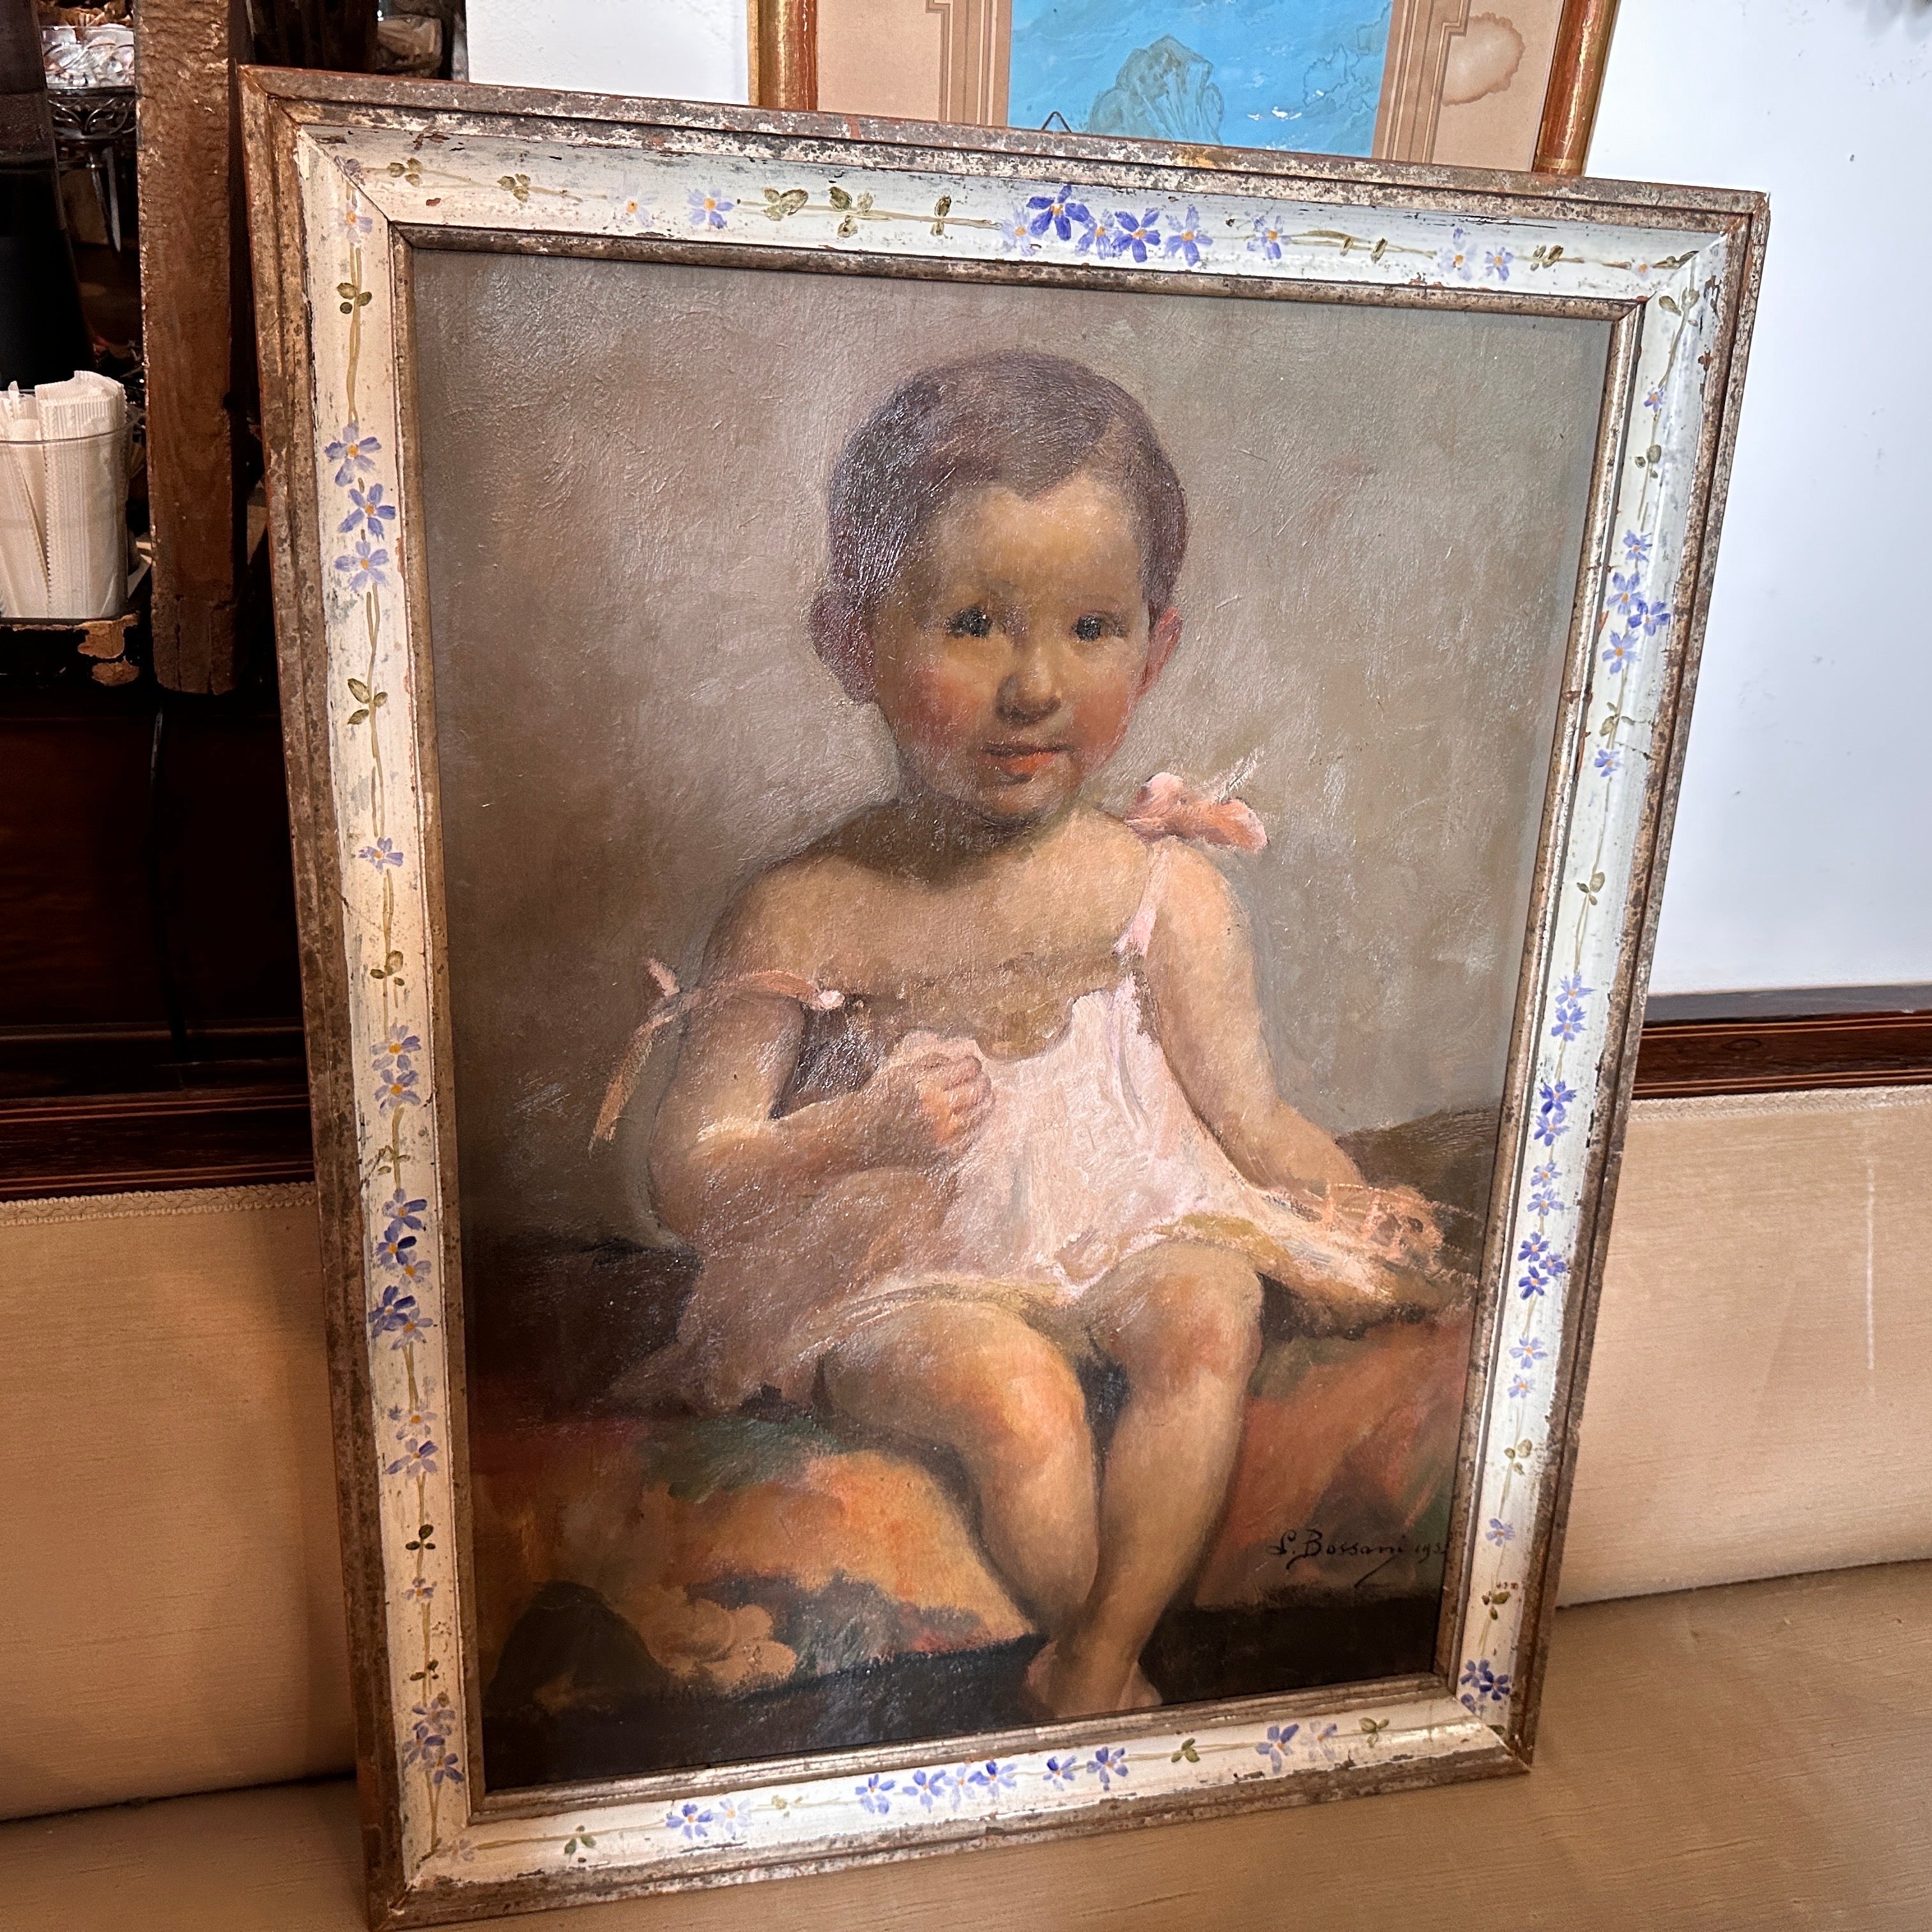 In 1952, the talented Italian artist Lucia Bassani created a captivating portrait on plywood of a little girl that continues to enchant viewers with its tender portrayal and skillful execution. The painting features a young girl, likely around the